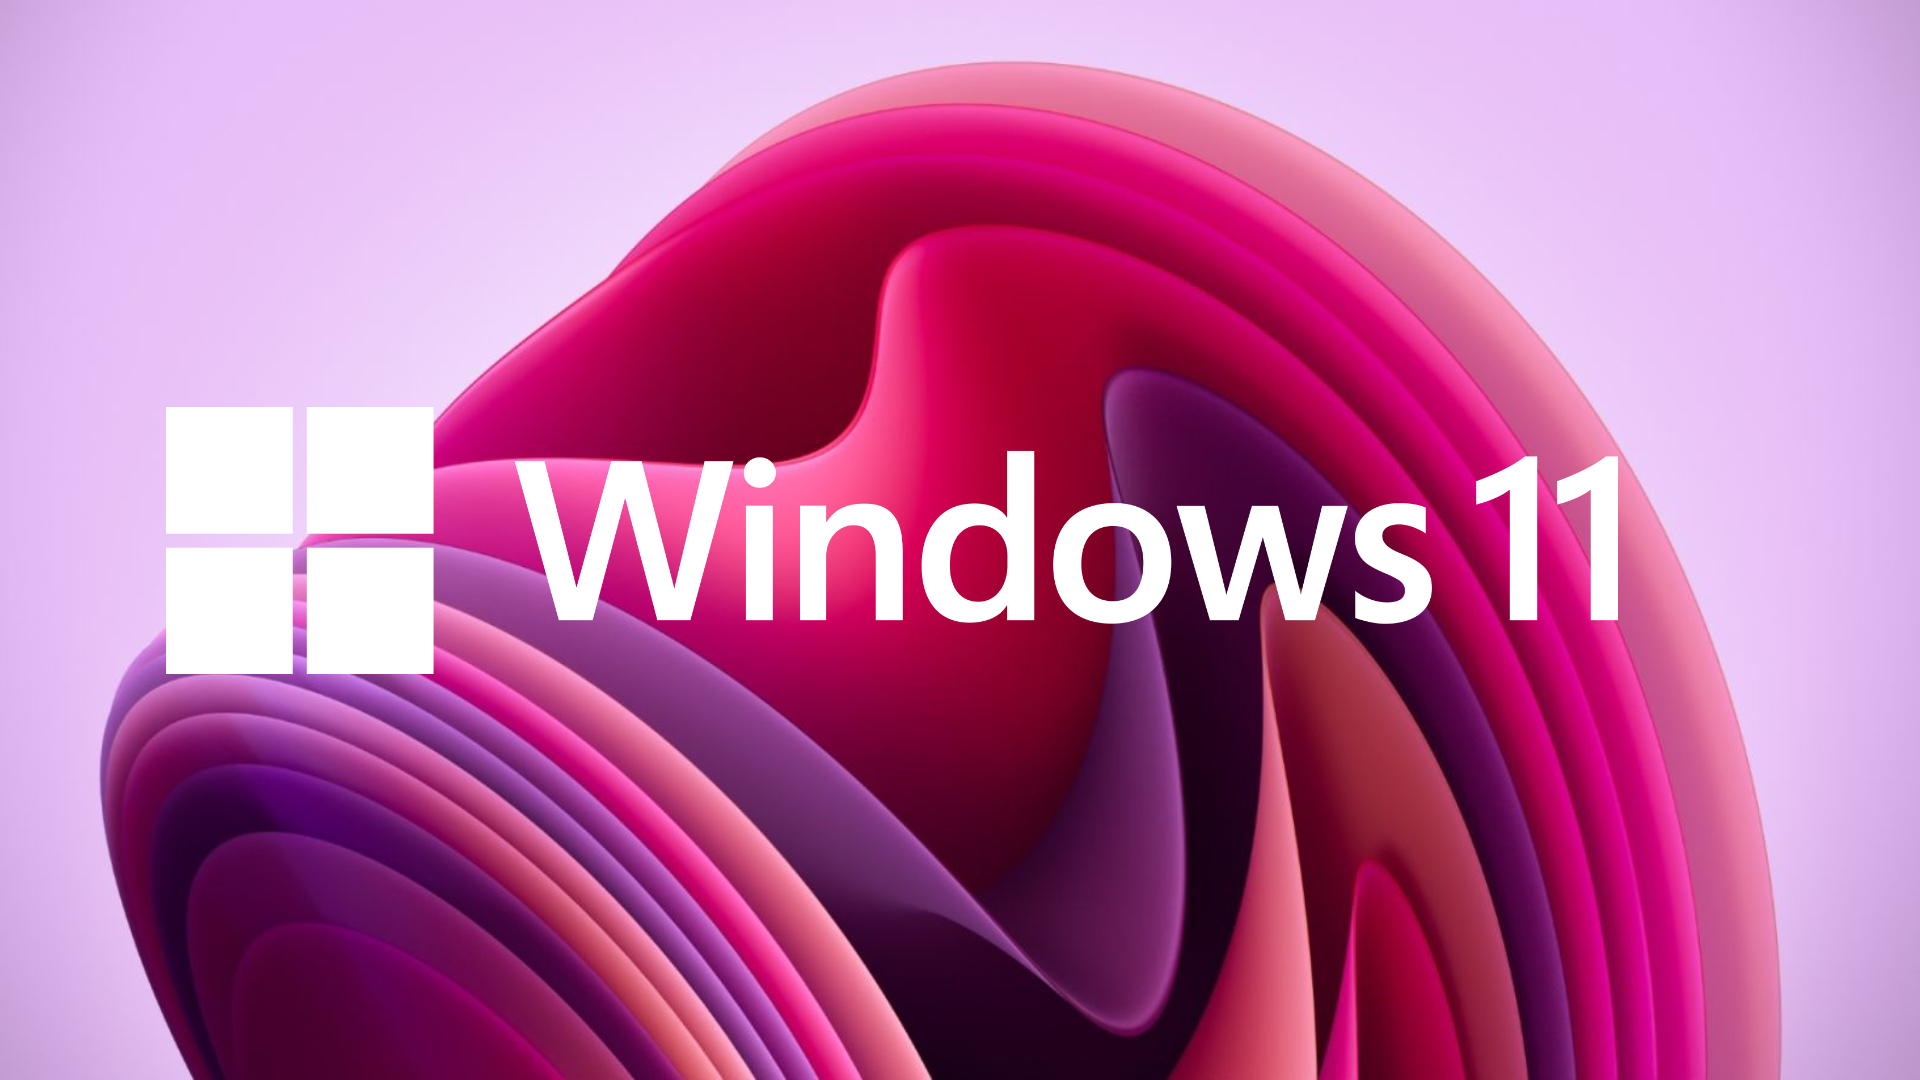 Microsoft will soon stop servicing the first version of Windows 11